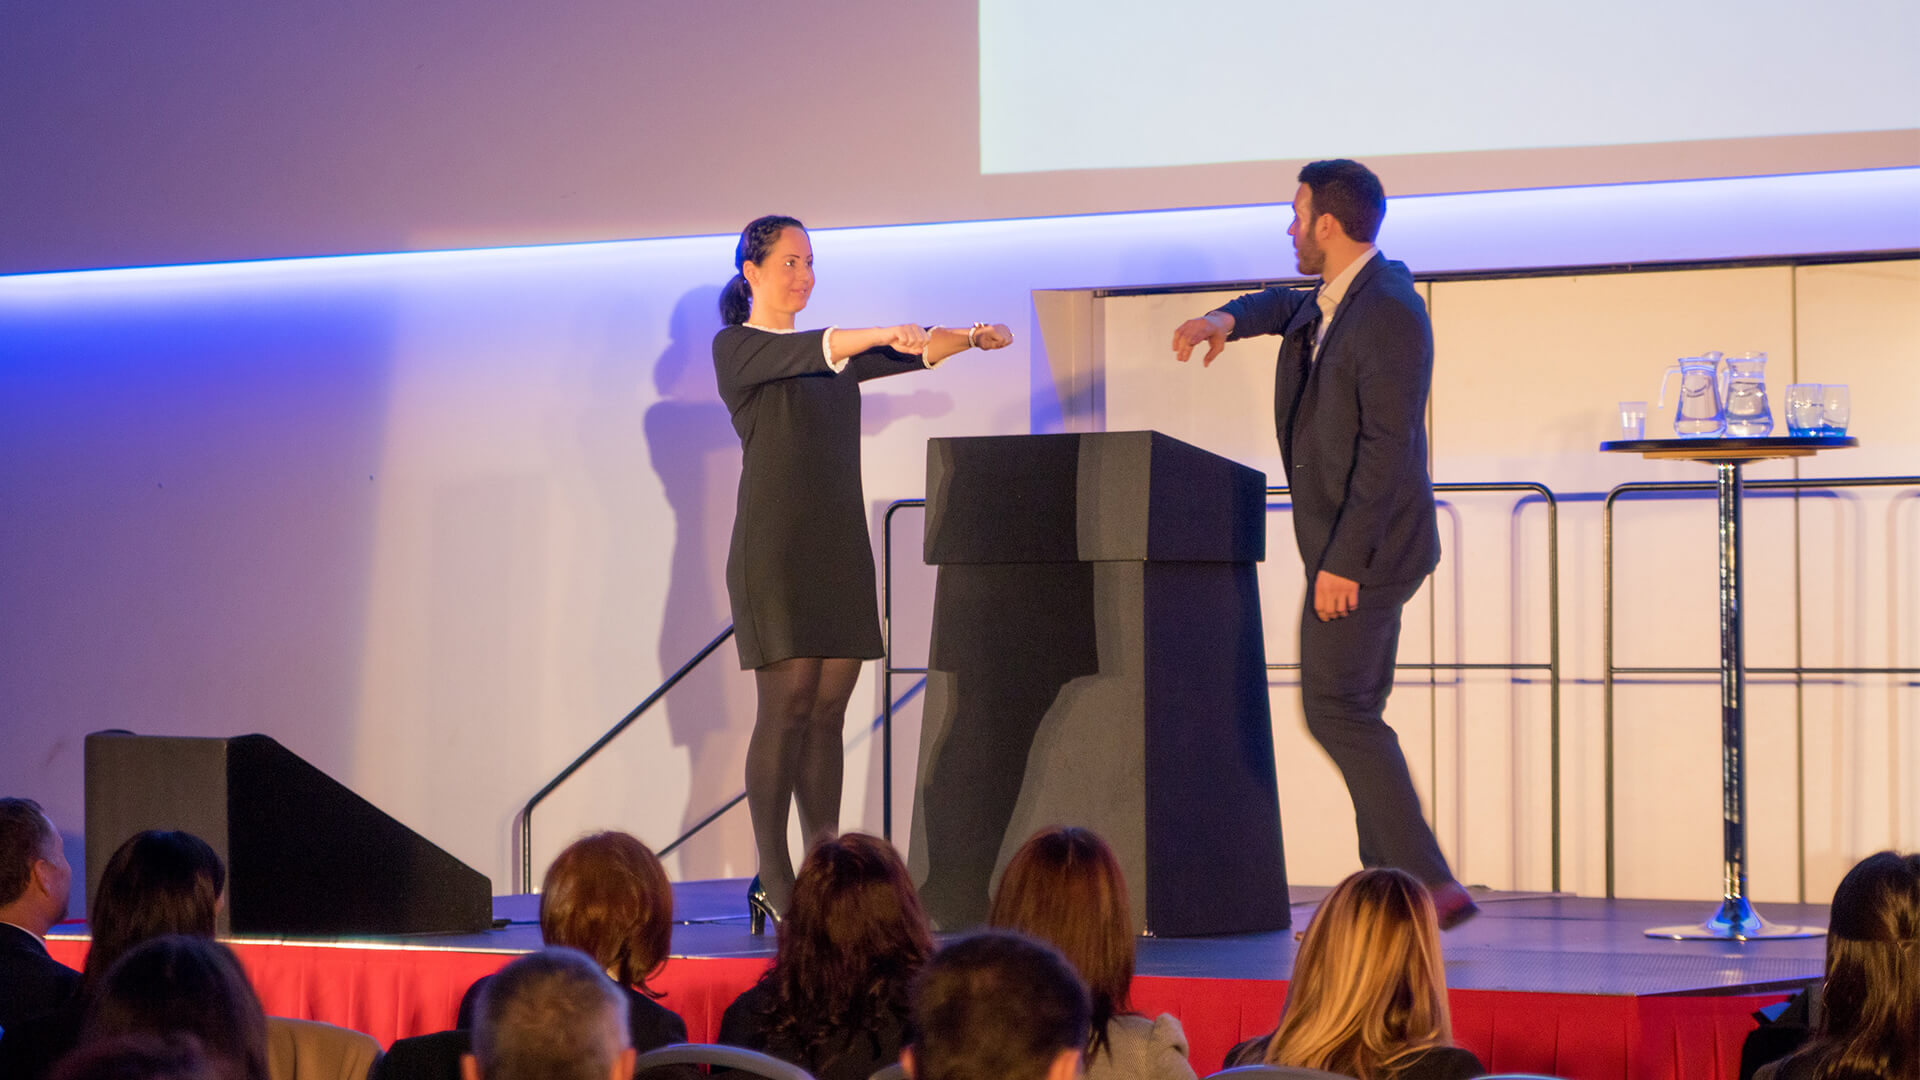 Aaron demonstrating the psychology of business on stage at Corporate event as Manchester magician